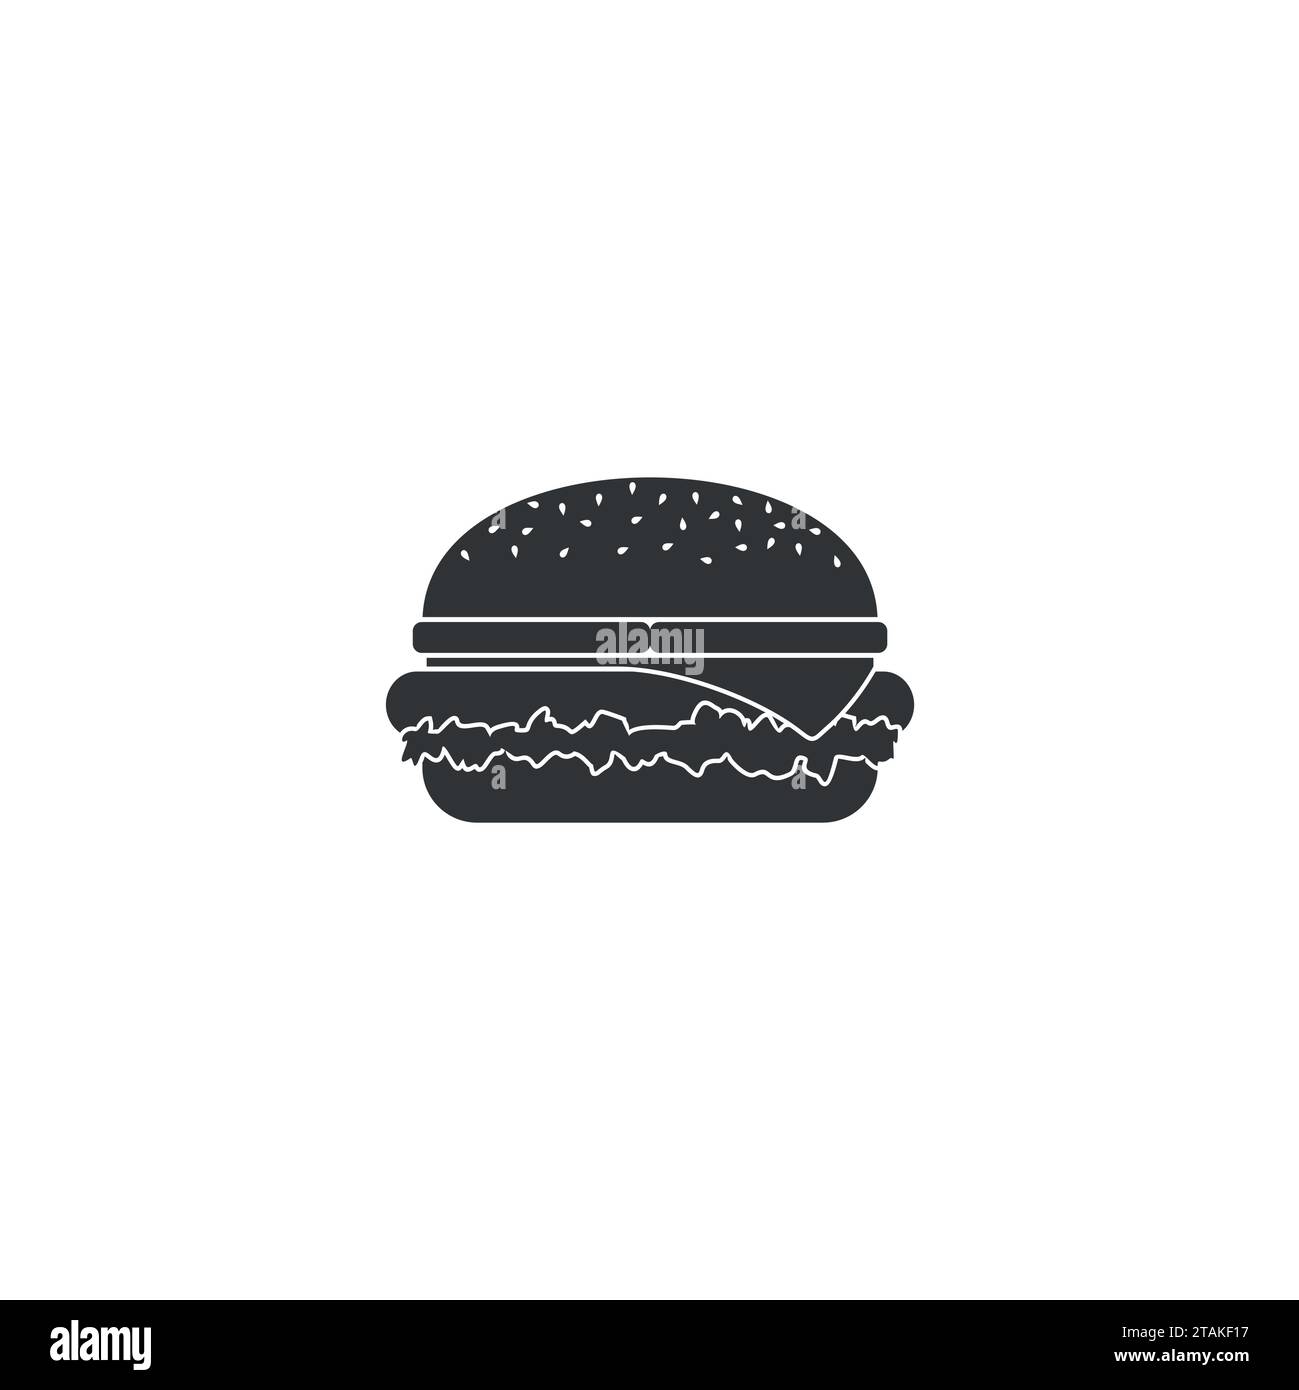 Black hamburger icon isolated on white background. Grilled sandwich burger icon with cheese and snack big burger american cheeseburger delicious cuisi Stock Vector